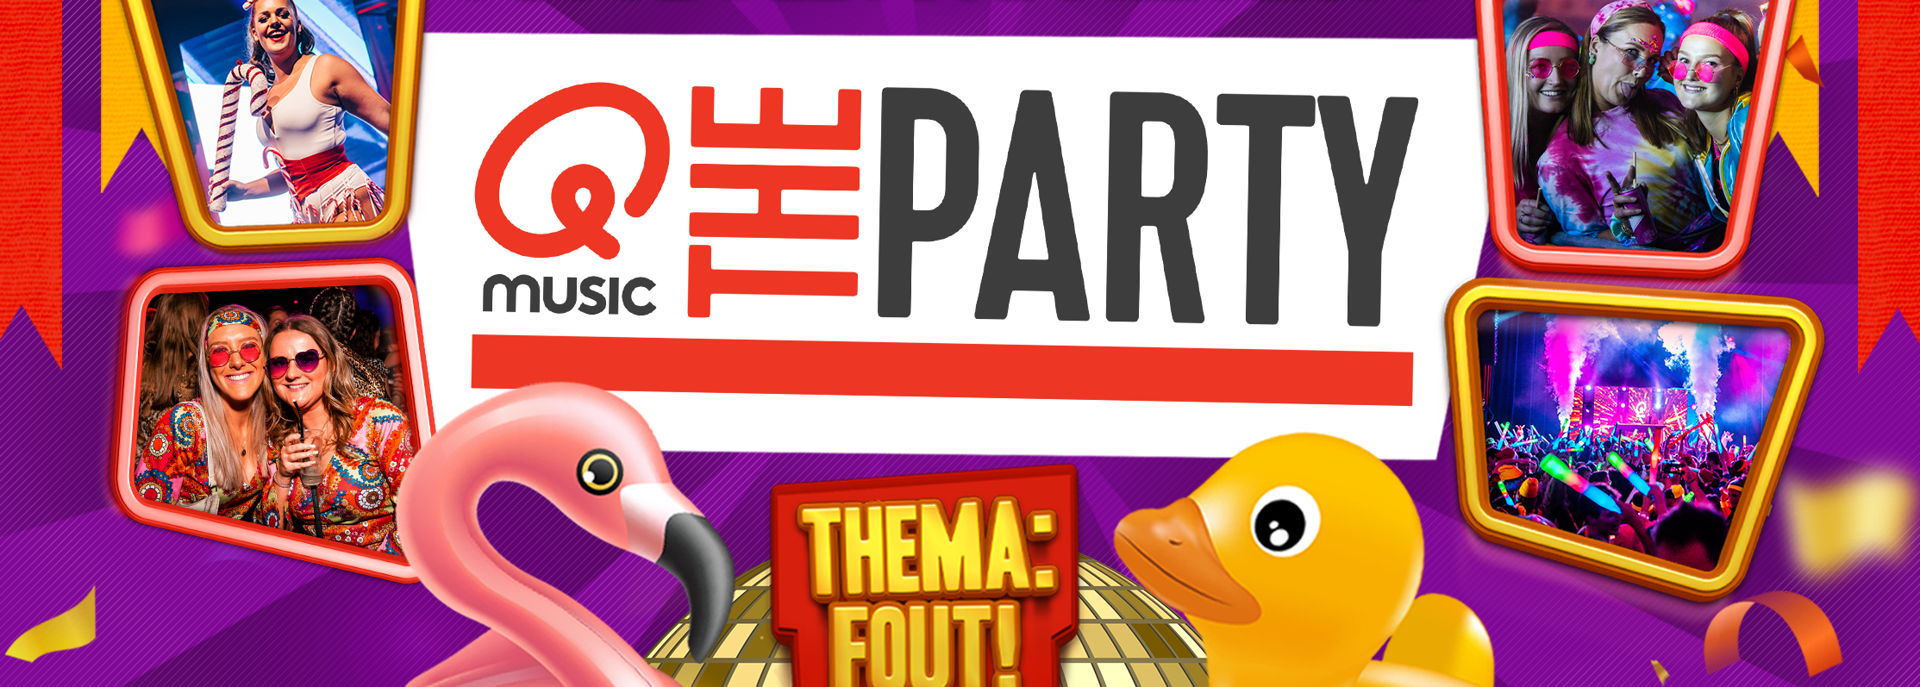 Qmusic The Party Fout - 2023 - In De Tamboer